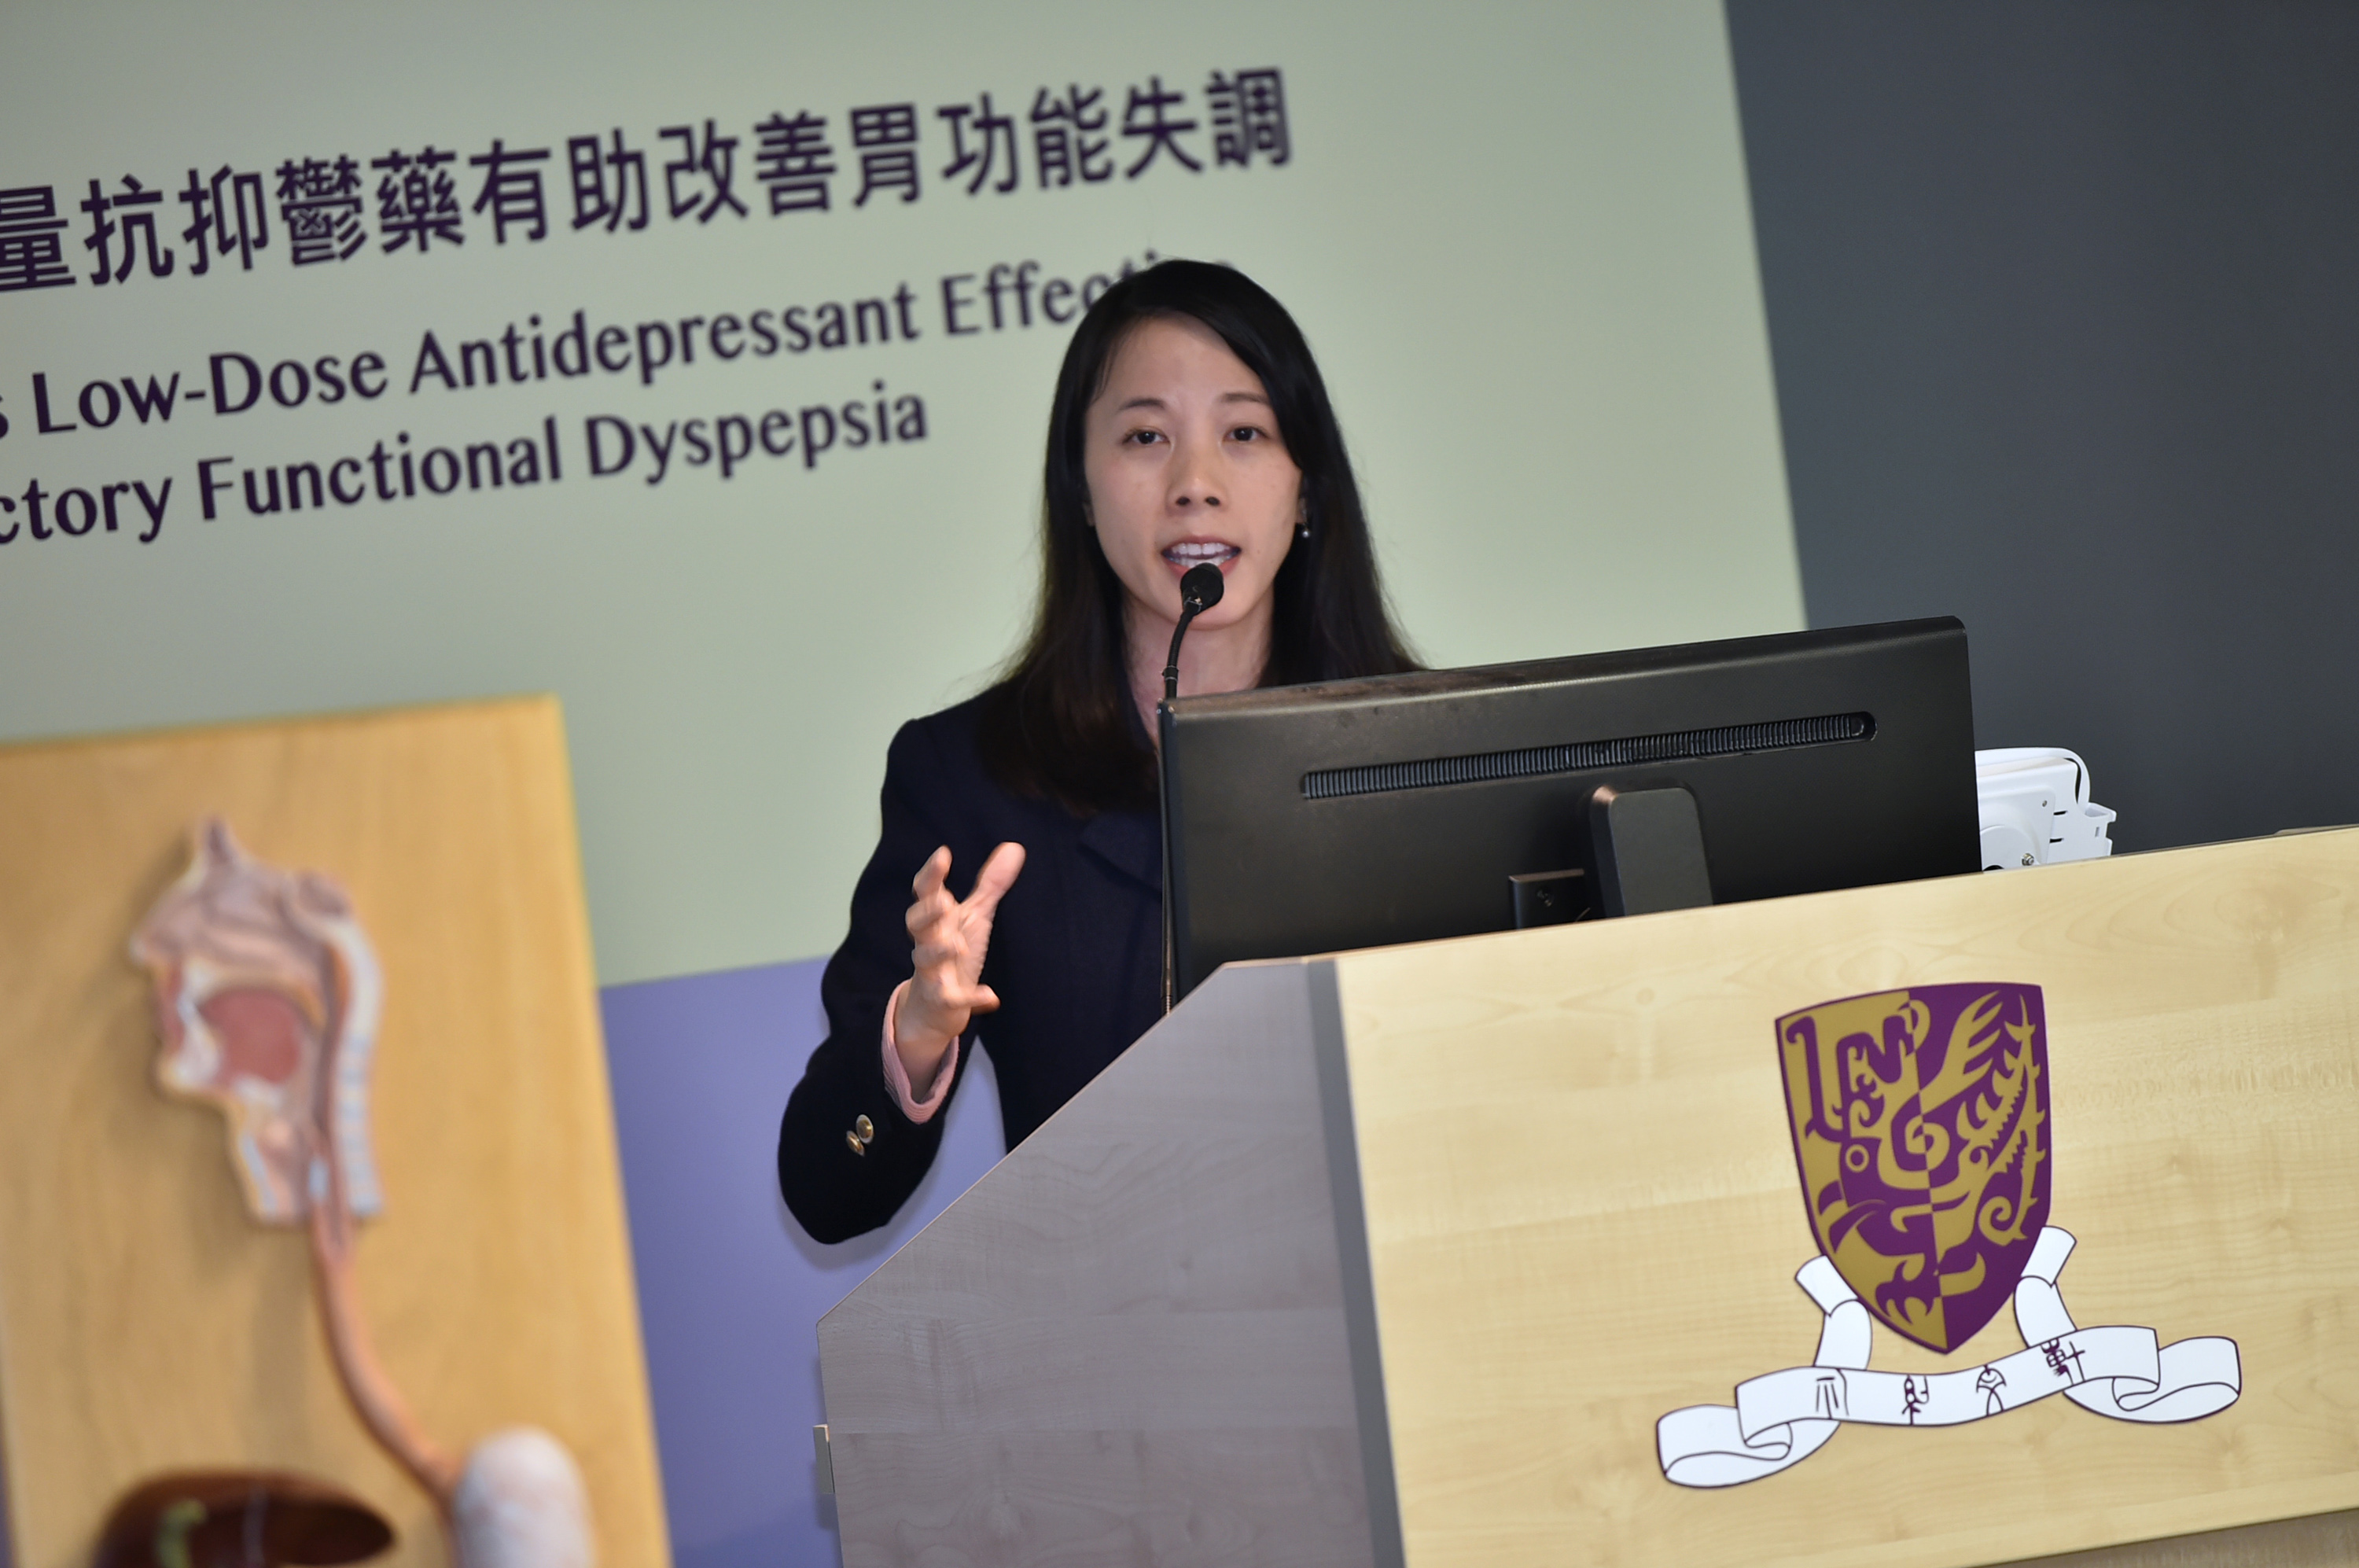 Ms. Yawen CHAN says patients of functional dyspepsia often appear with anxiety symptoms. She reminds the public to take care of emotional health.